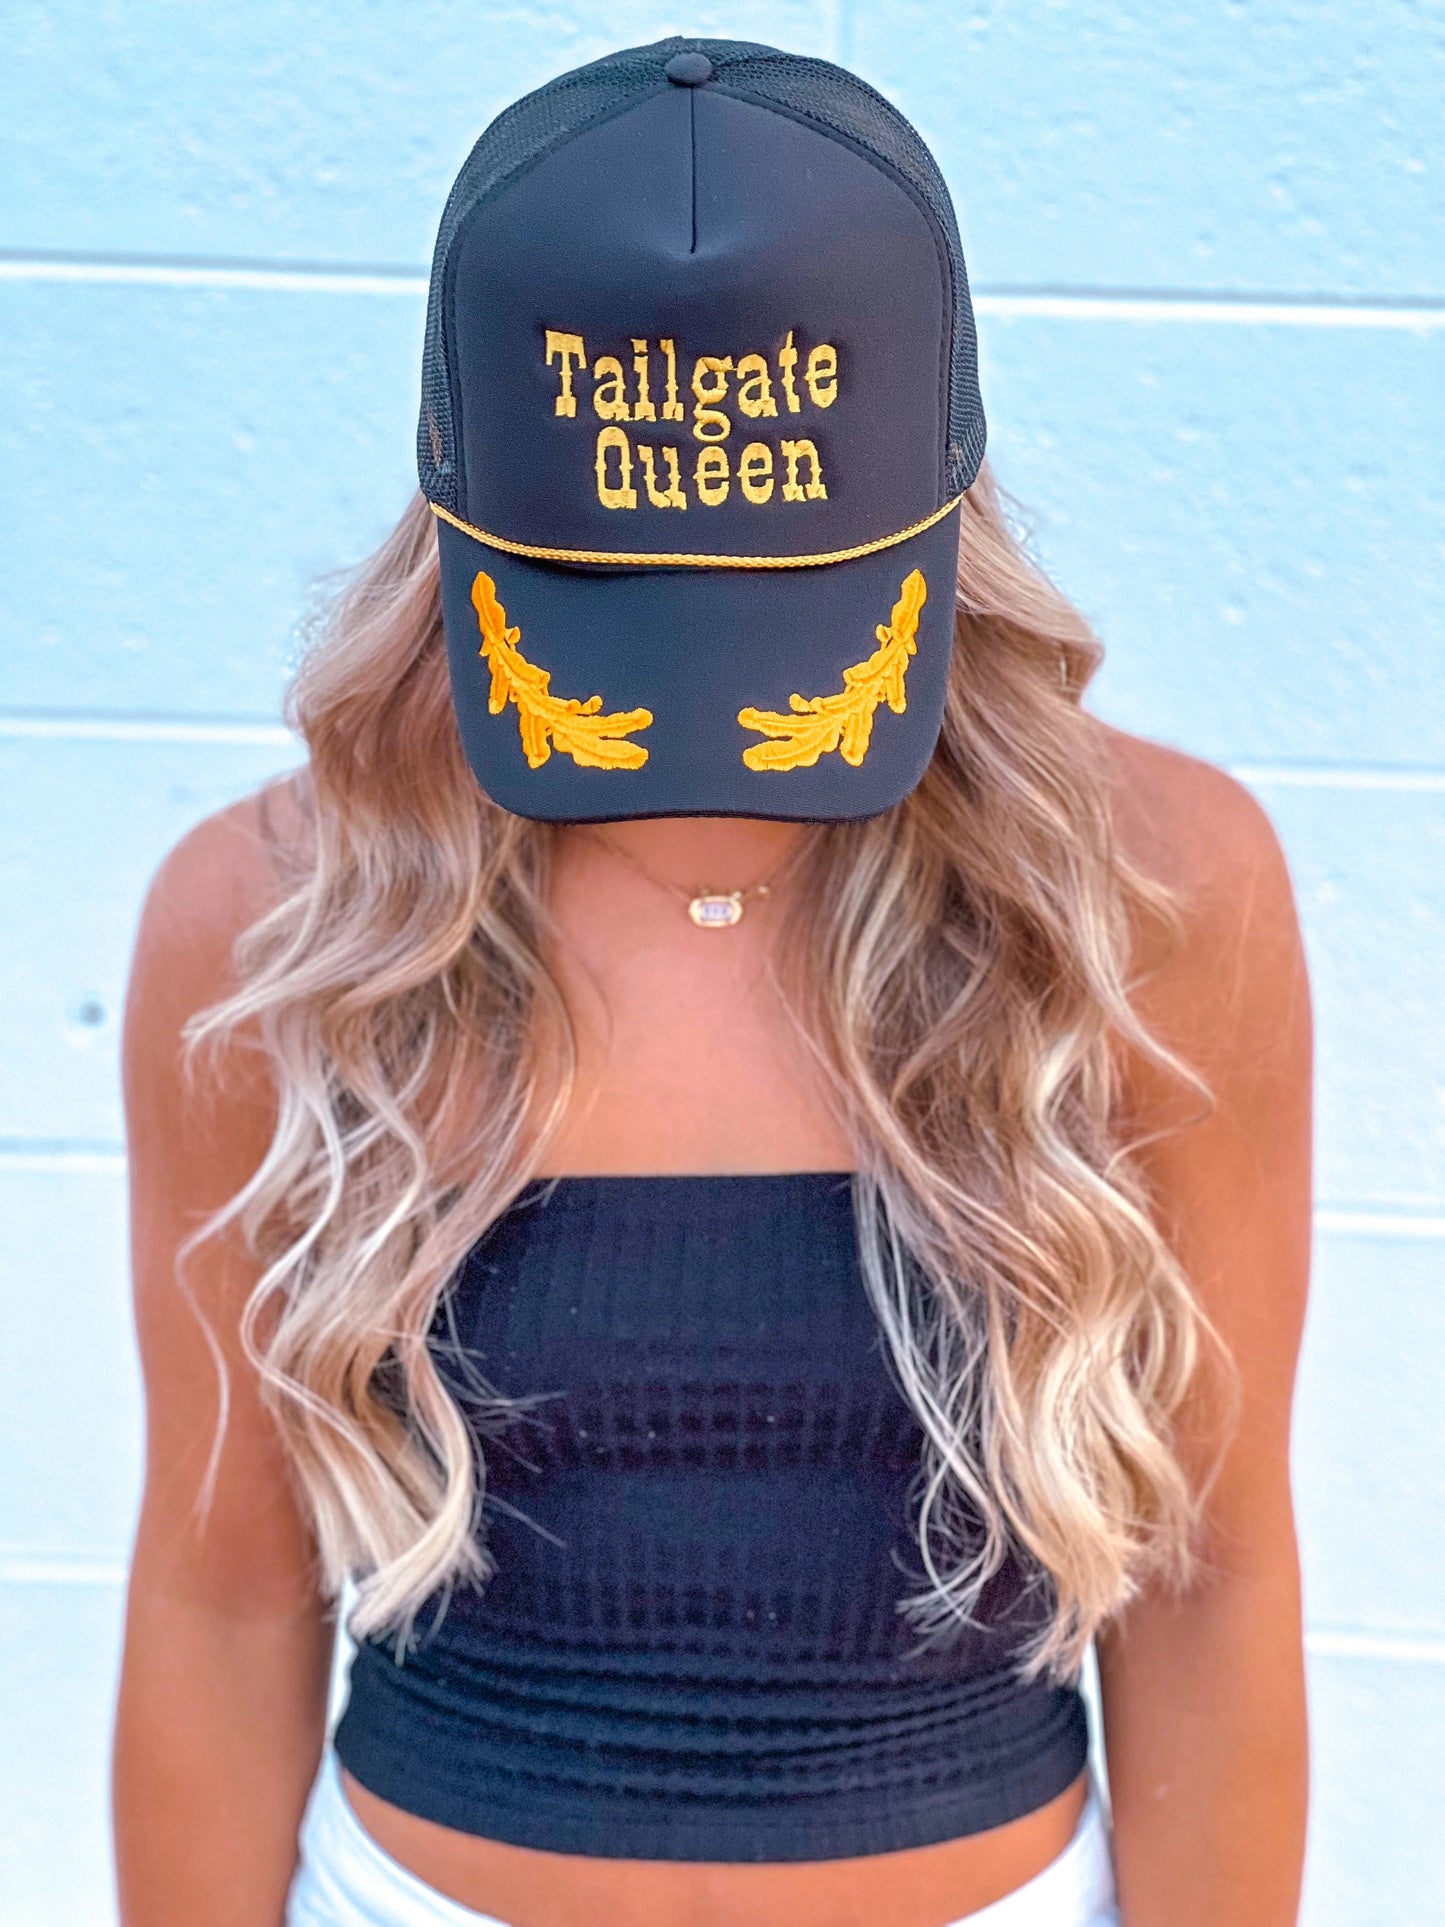 TAILGATE QUEEN - CountryFide Custom Accessories and Outdoors